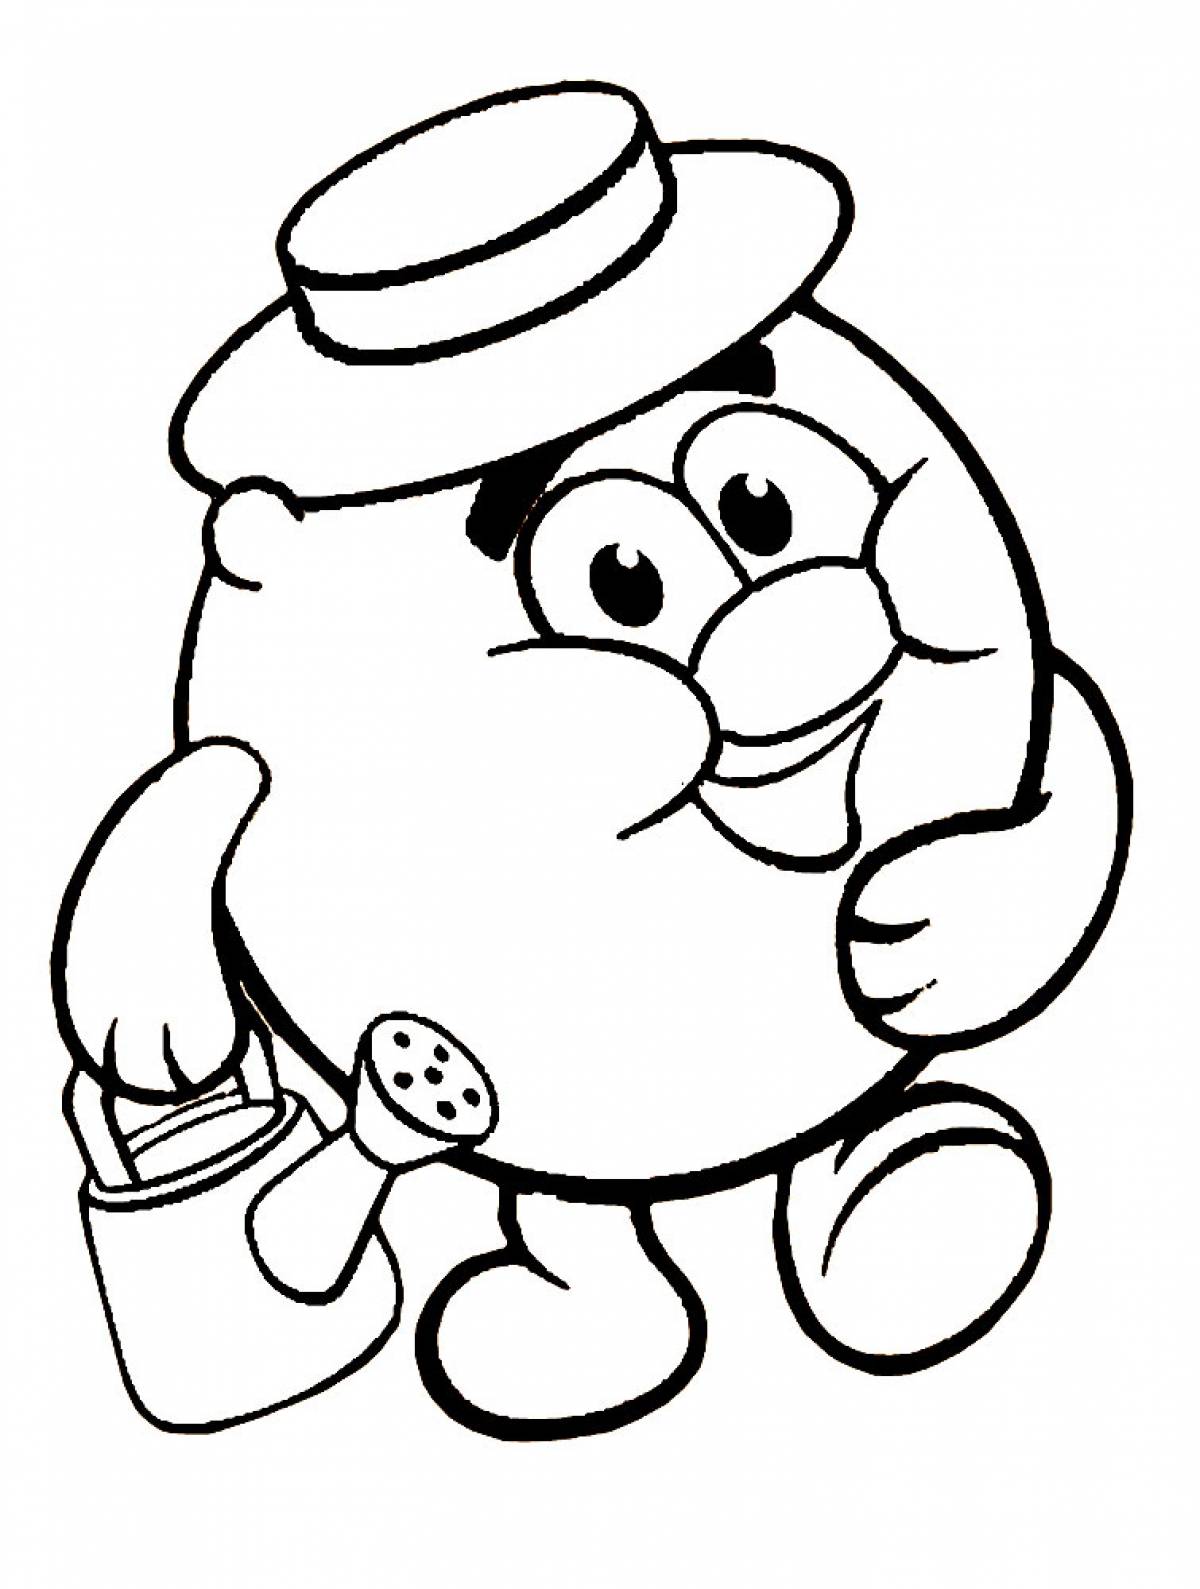 Coloring page kopatych